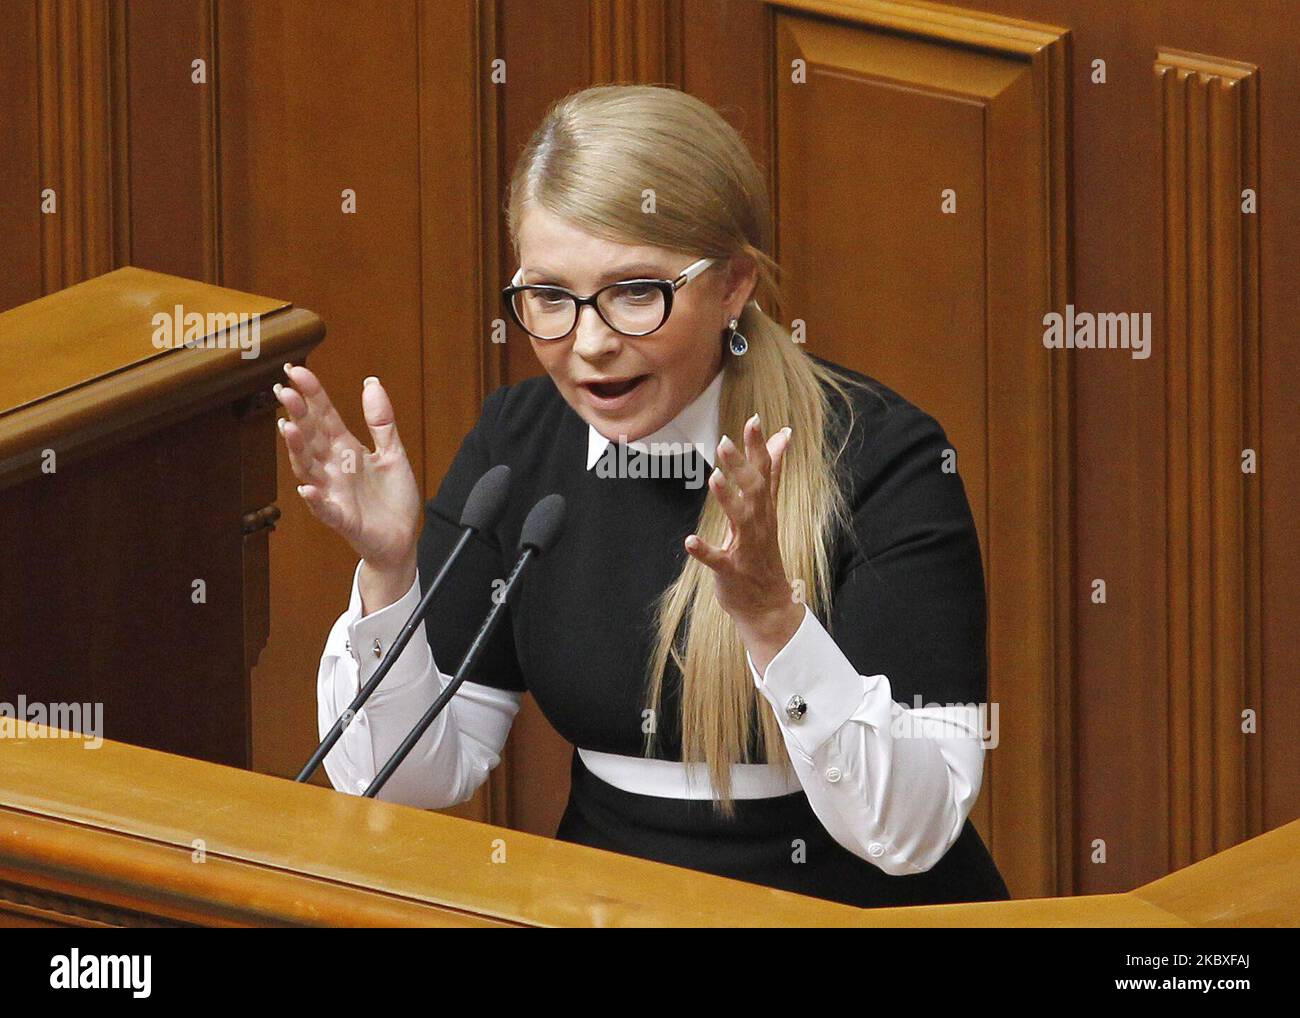 This file photo taken on 2 October, 2019 shows leader of the 'Batkivshchyna' political party and former Ukrainian Prime Minister Yulia Tymoshenko speaking during a Parliament session of Verkhovna Rada in Kyiv, Ukraine. Yulia Tymoshenko has tested positive for the COVID-19 coronavirus and she is in serious condition, as Tymoshenko's press secretary Maryna Soroka informed on her Facebook page on 23 August, 2020. (Photo by STR/NurPhoto) Stock Photo